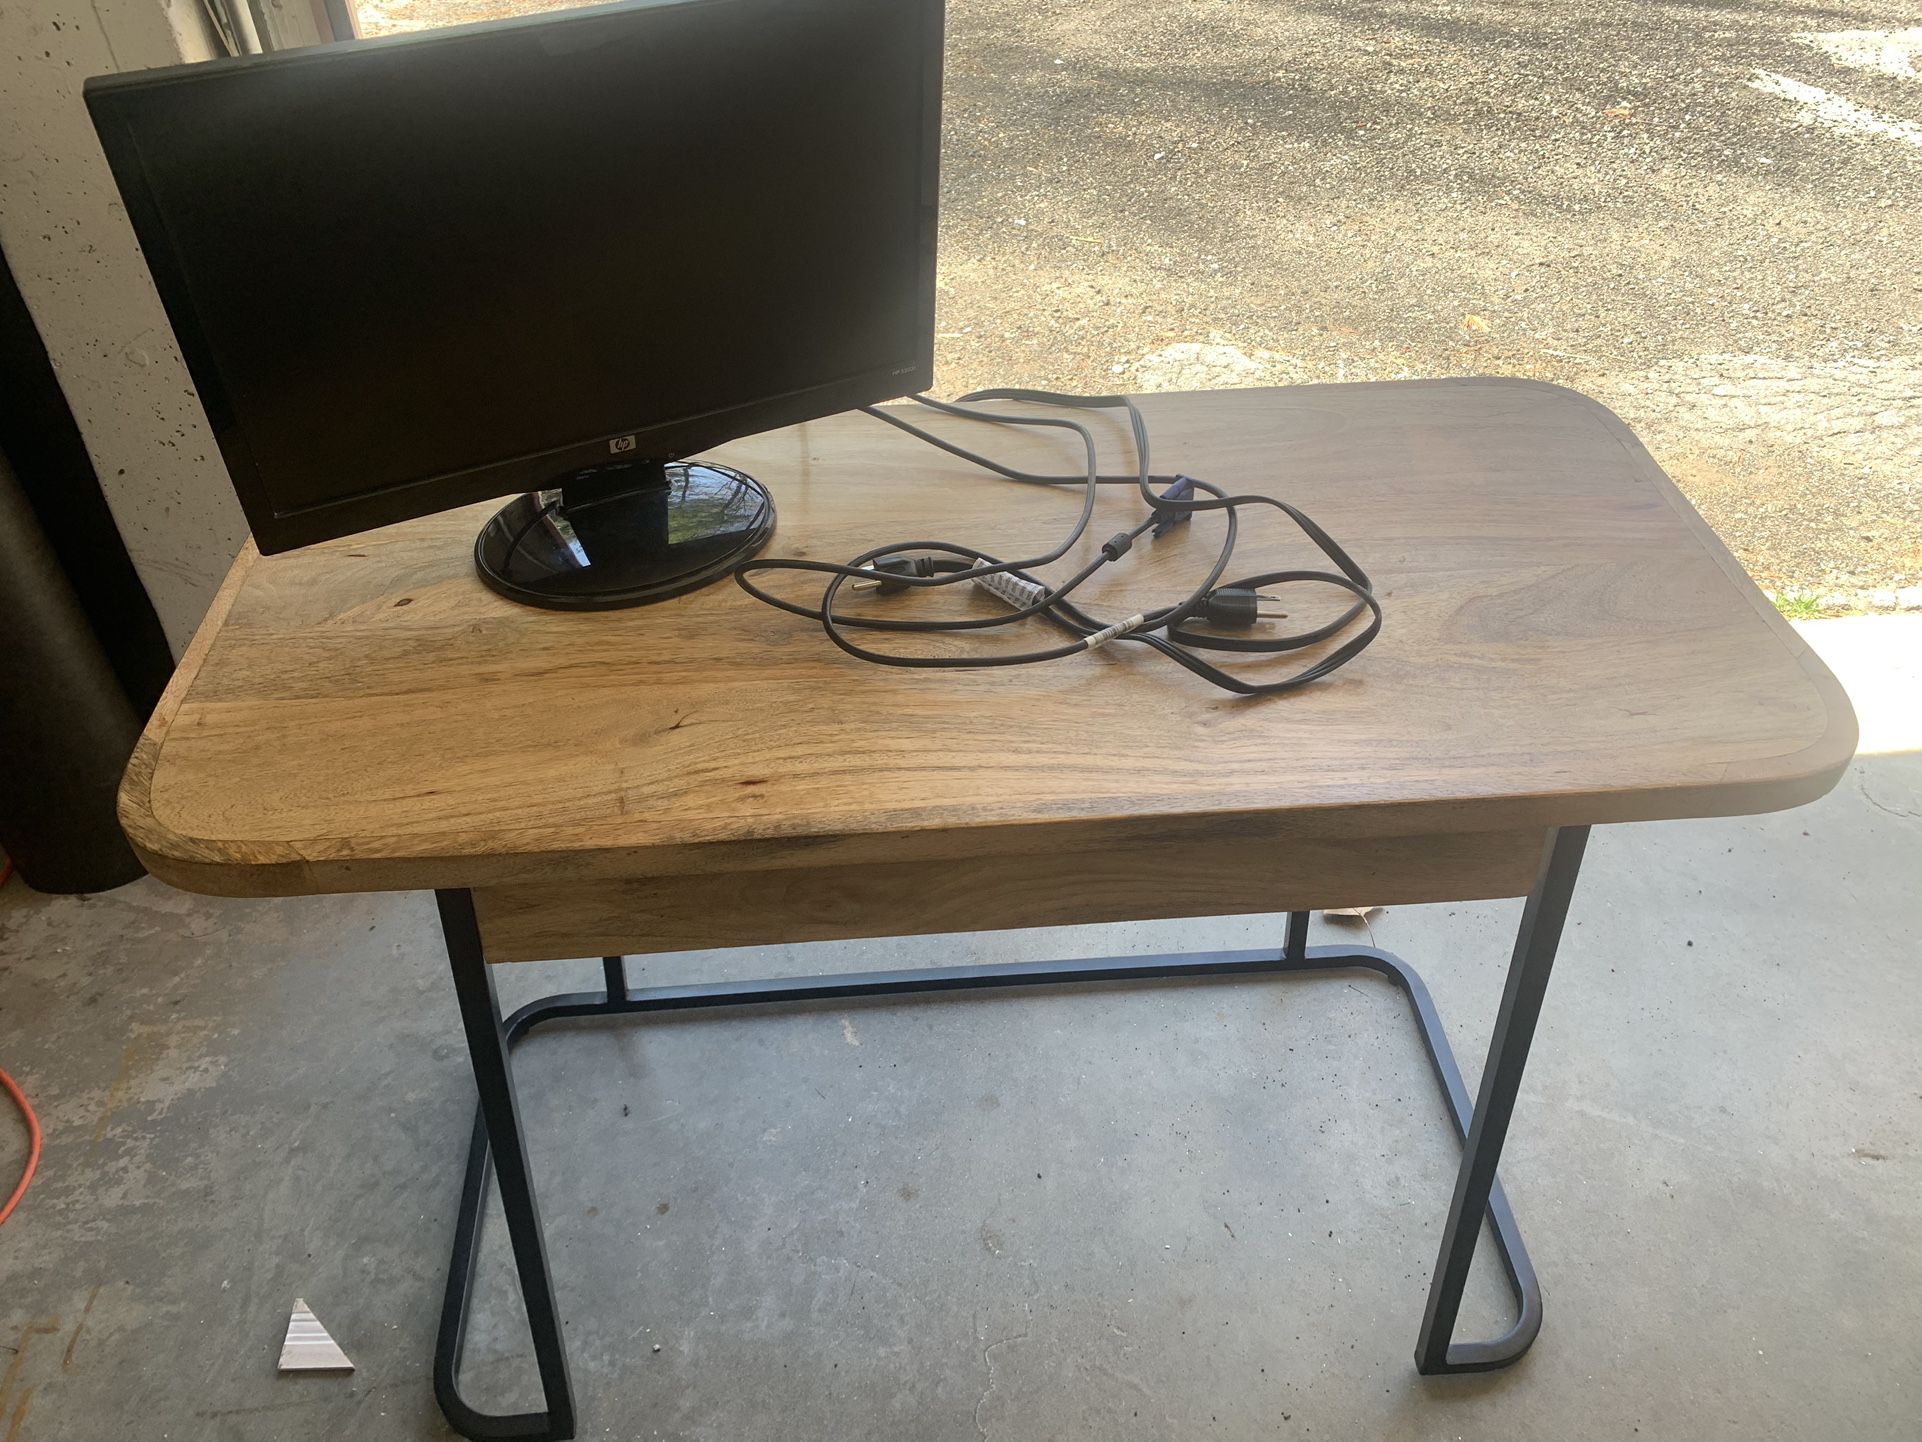 Desk And Monitor Combo